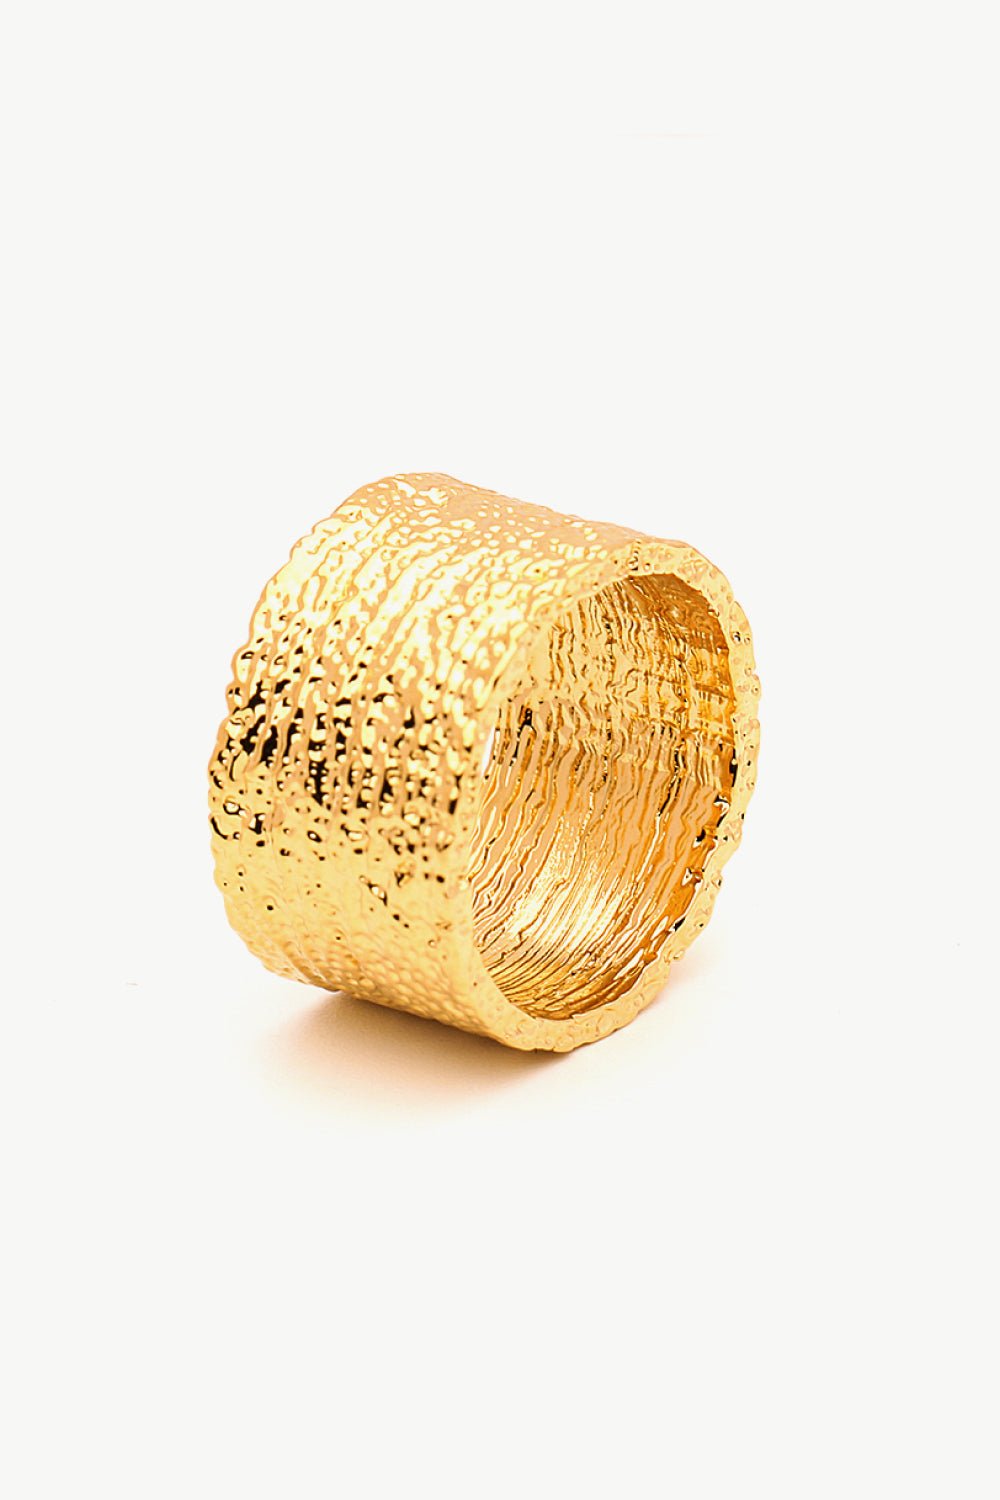 Textured Thick Band Ring - Fashion Girl Online Store